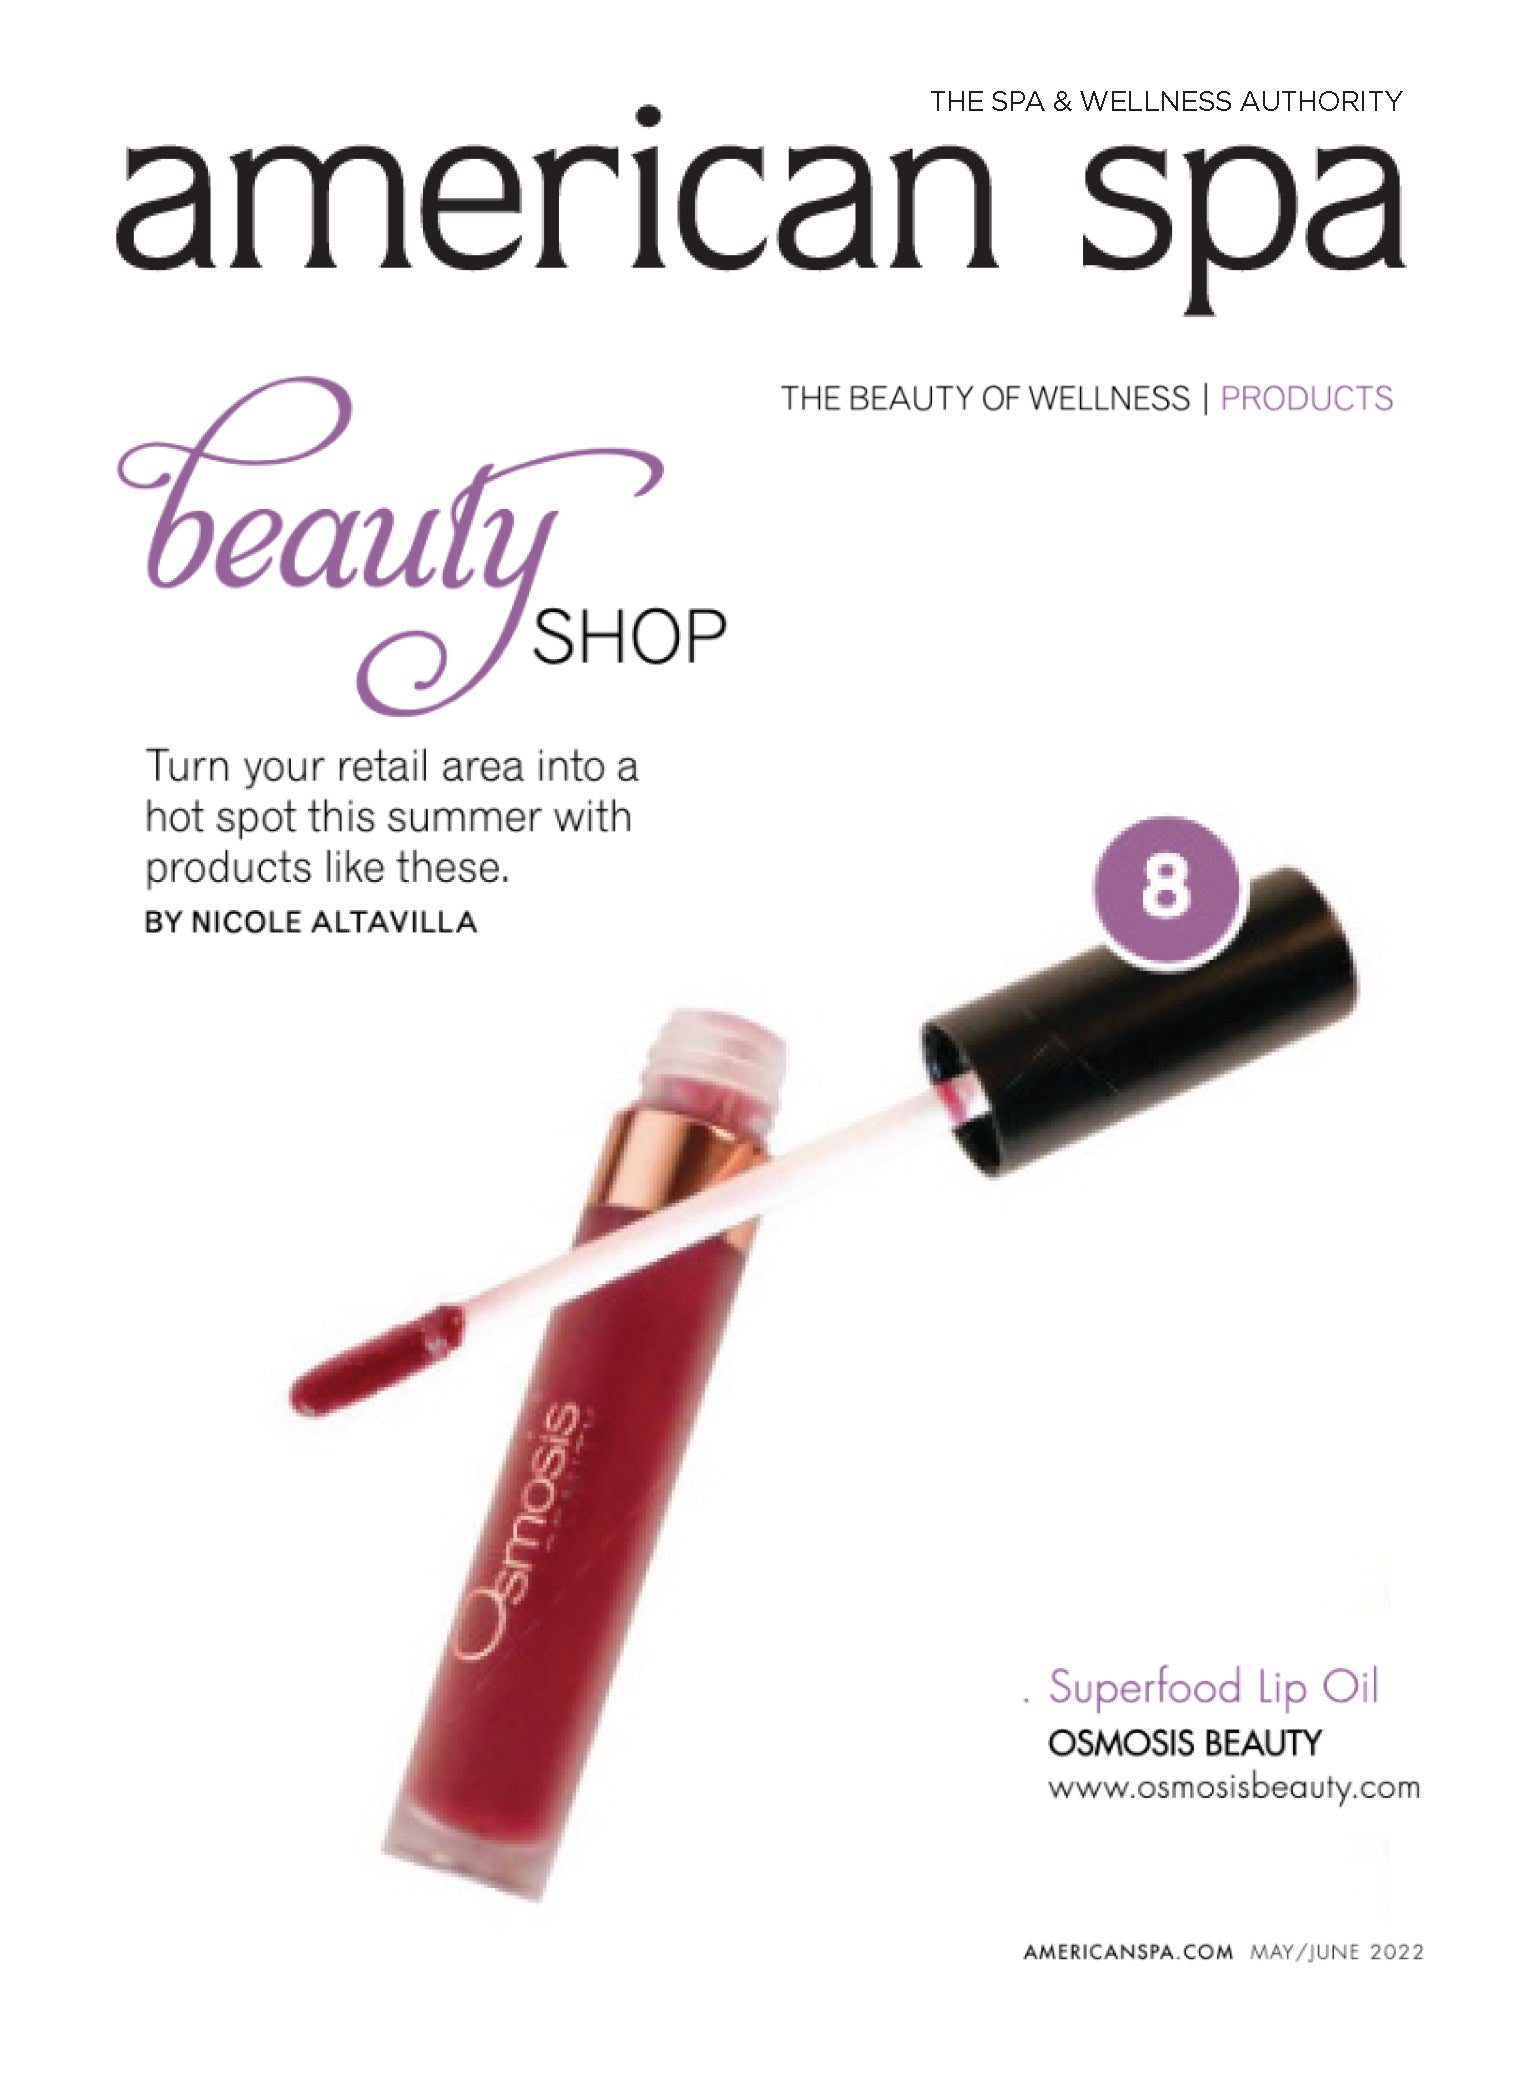 The Superfood Lip Oil was featured in the May/June issue of American Spa Magazine